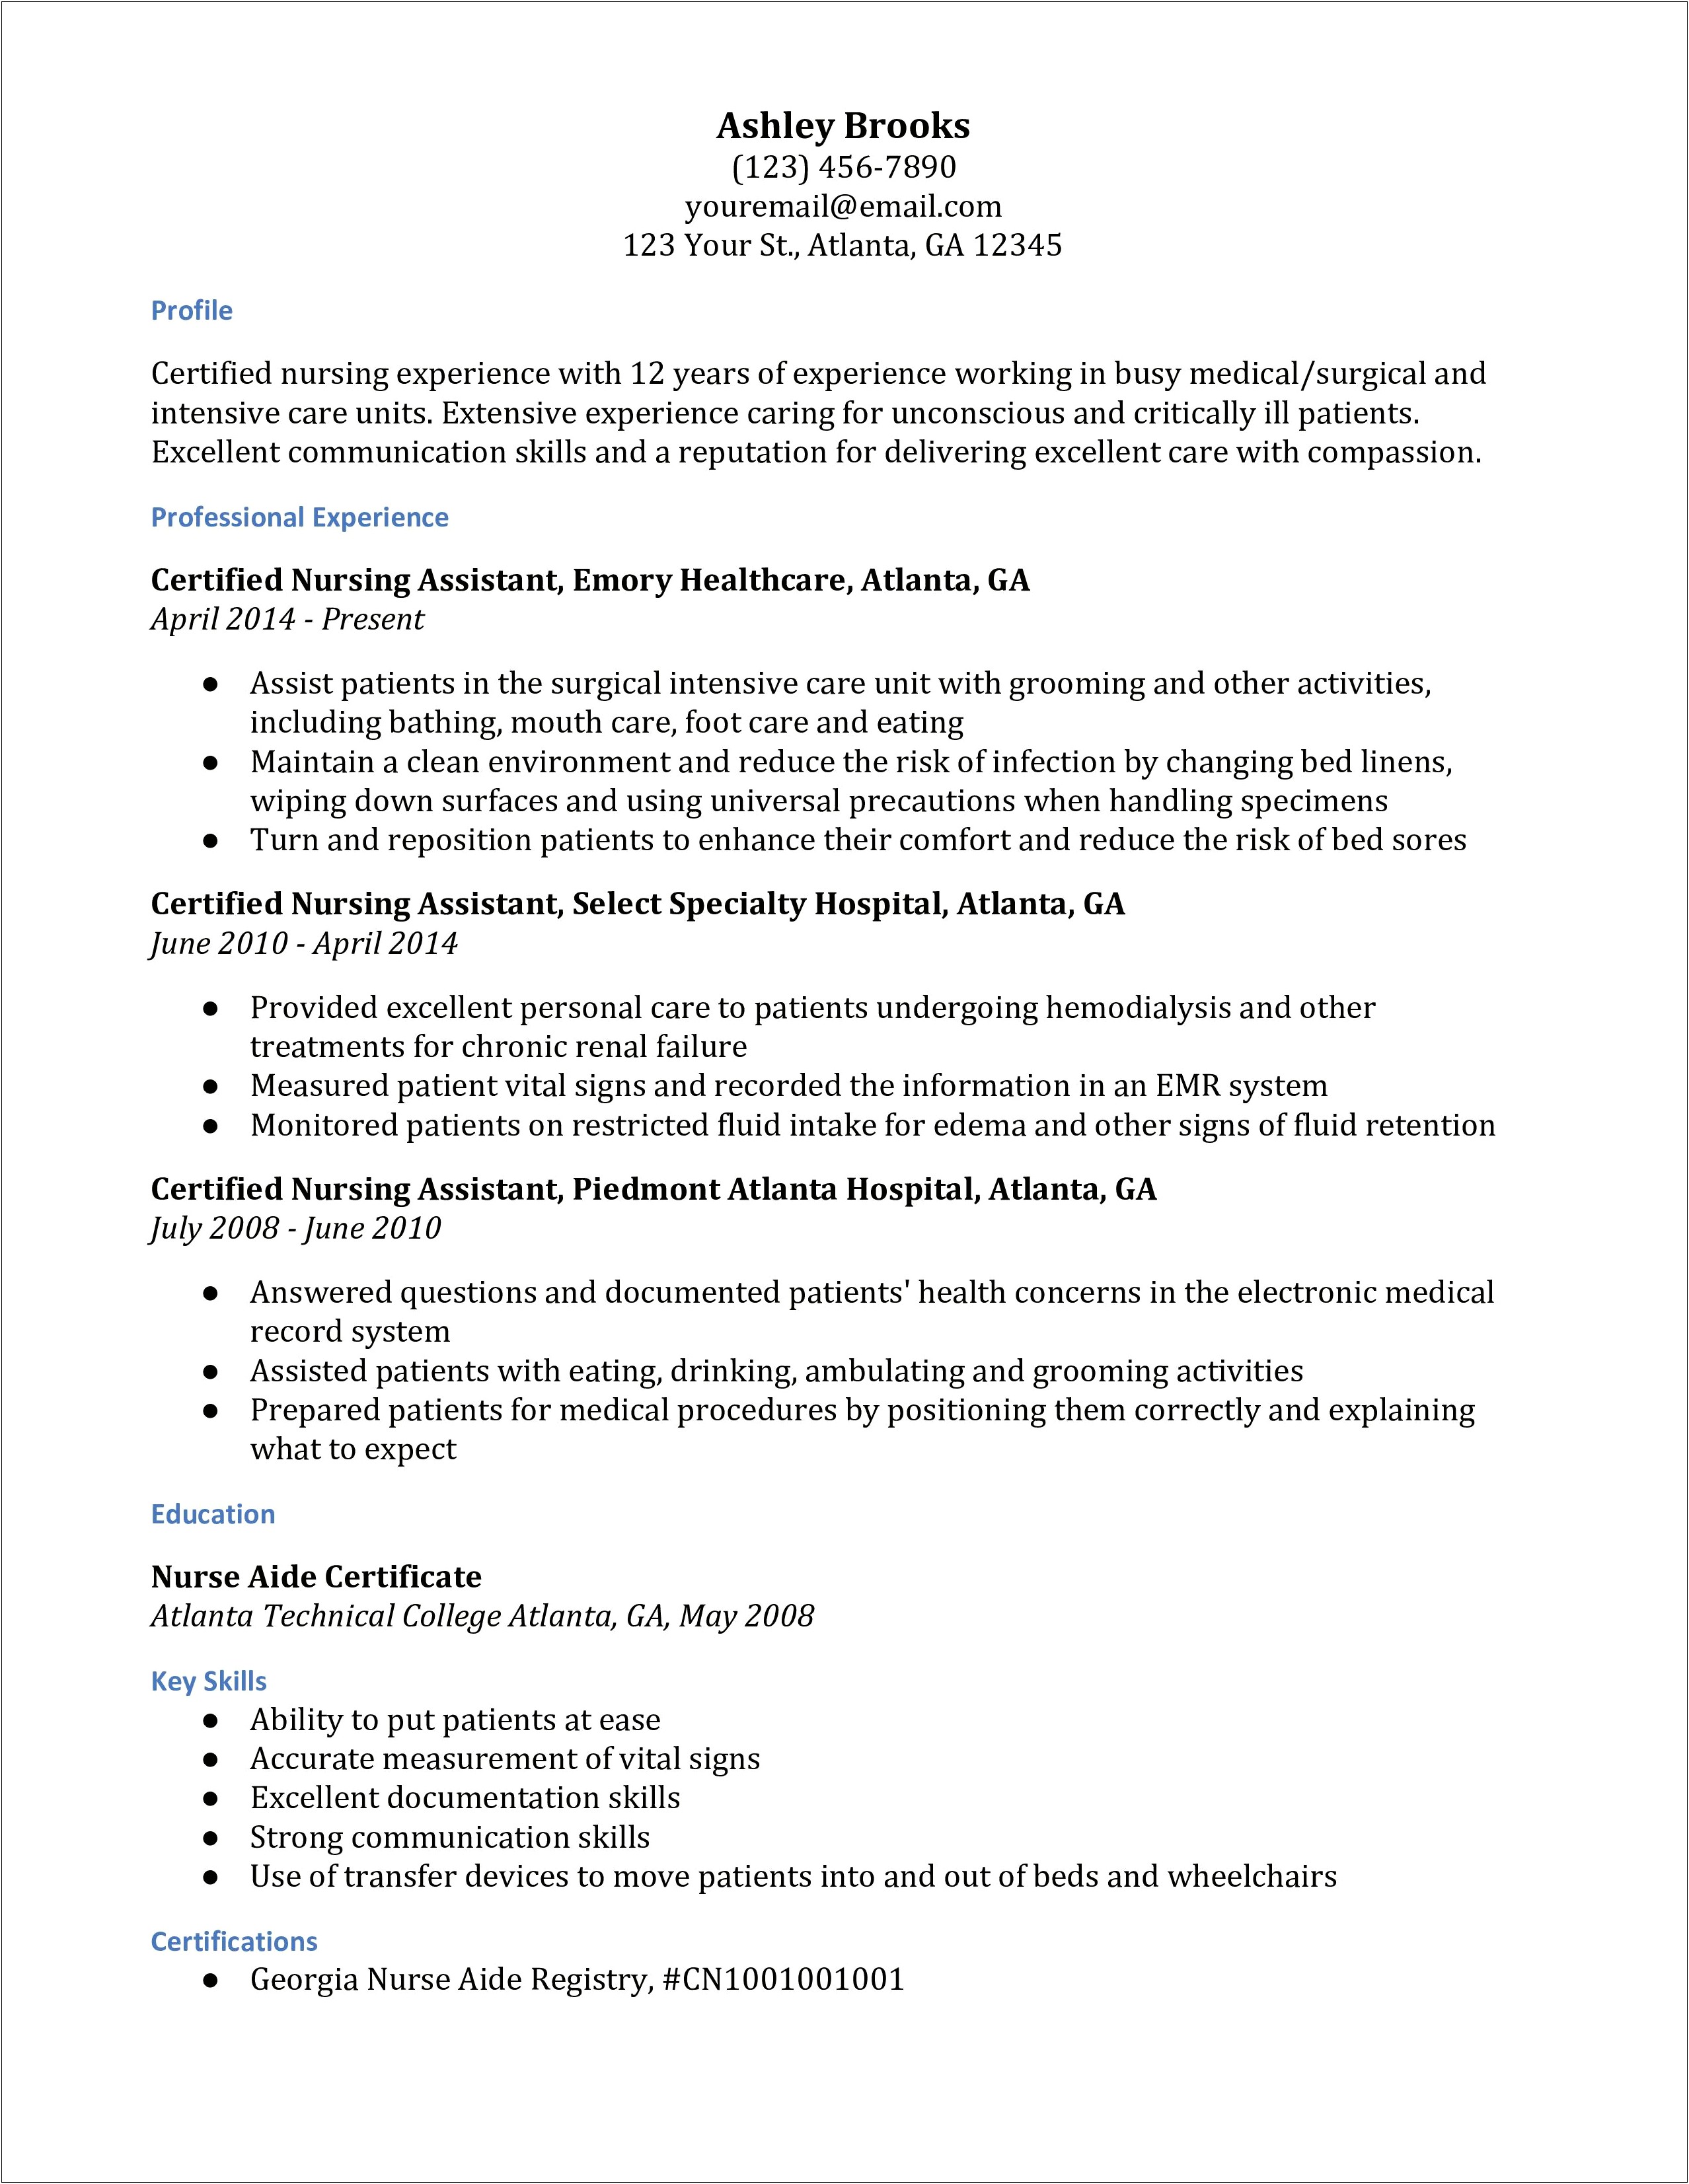 Resume Examples For A Certified Nurse Aide